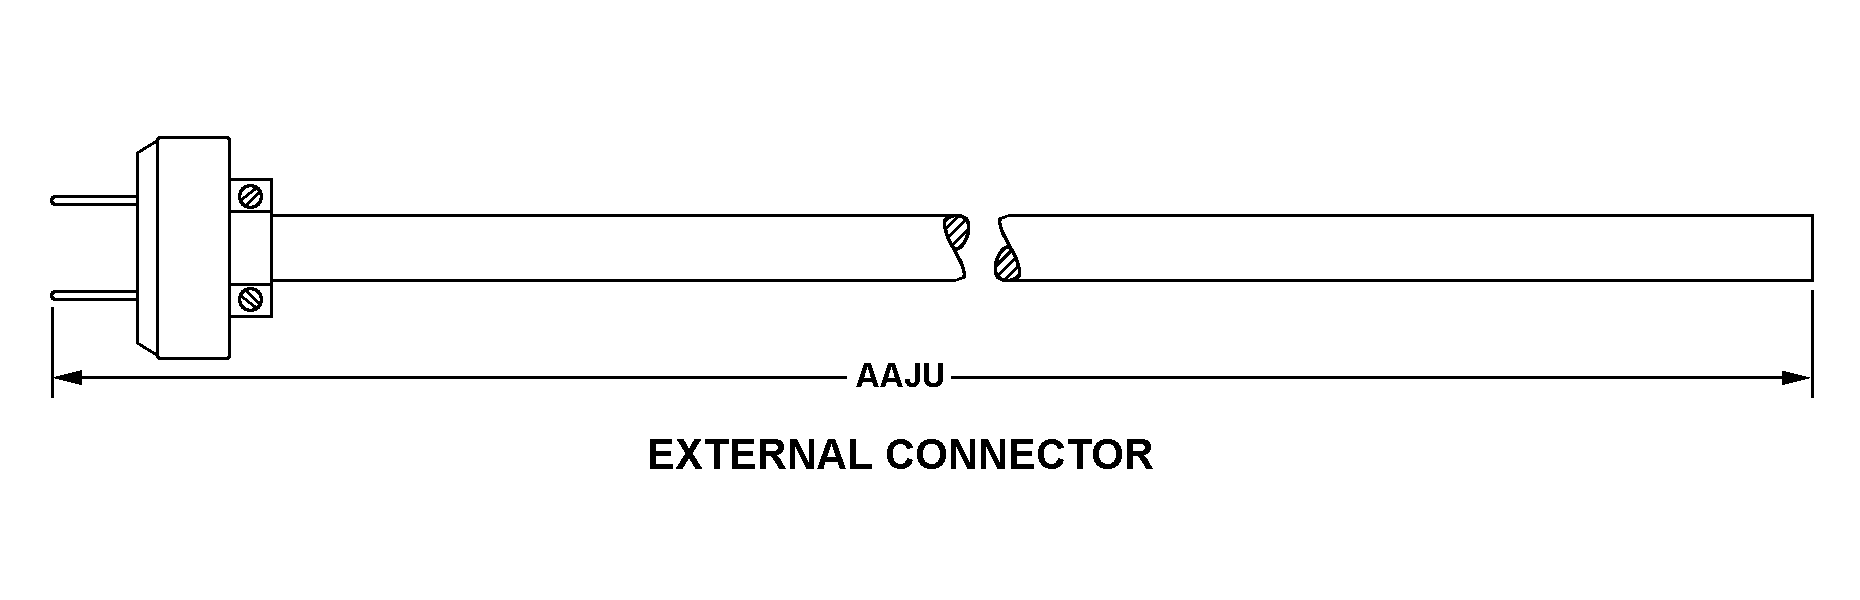 EXTERNAL CONNECTOR style nsn 5995-01-524-5192